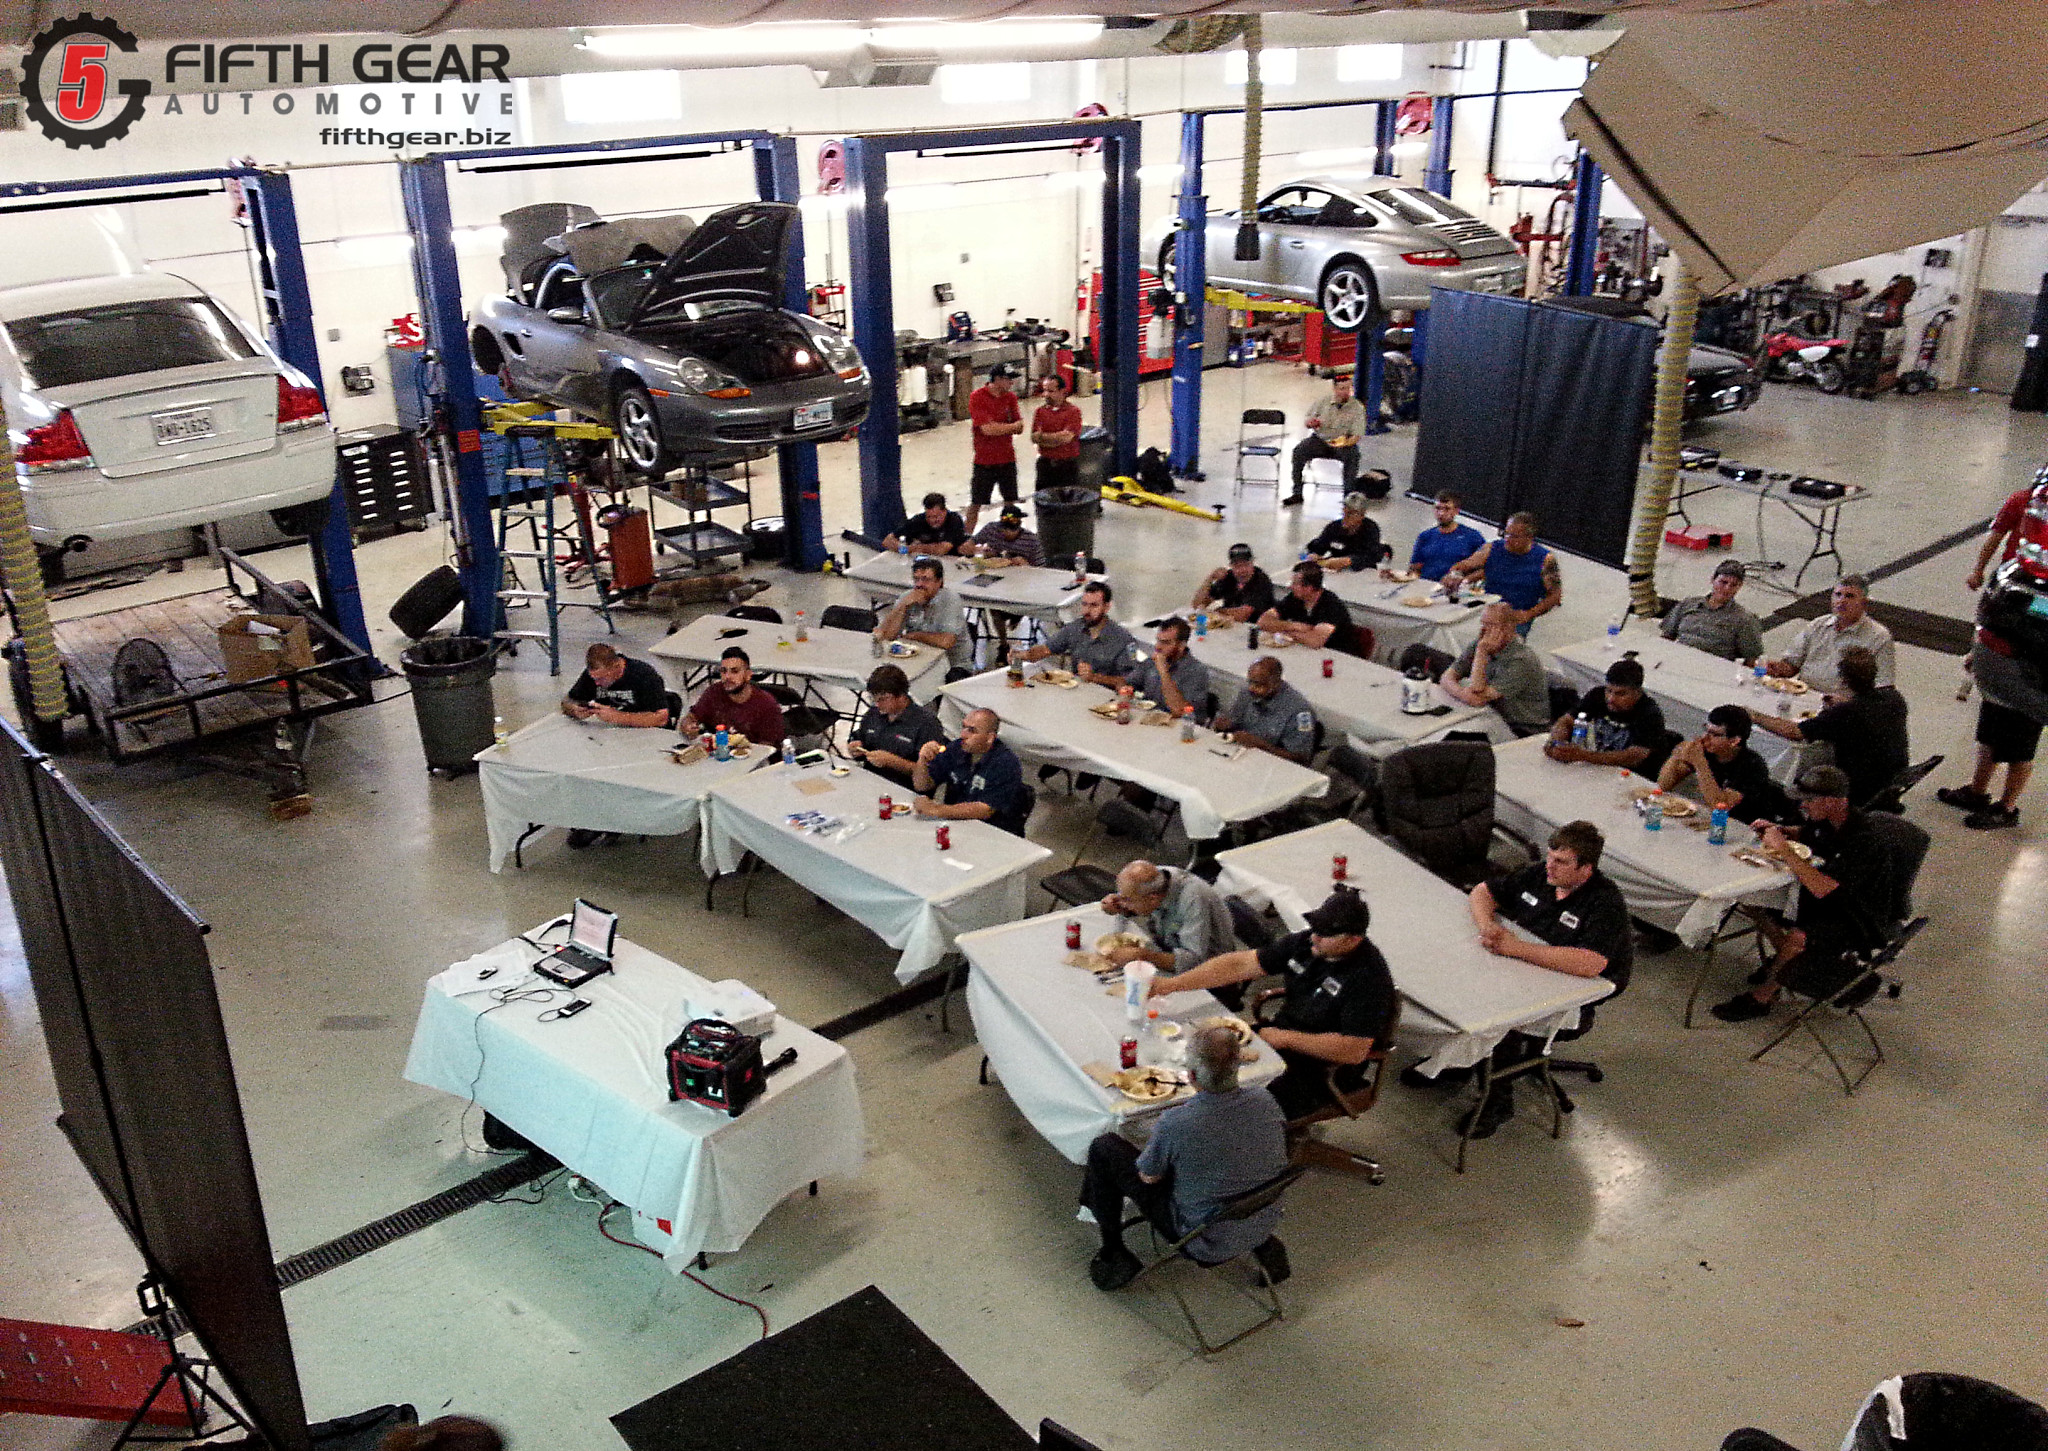 2048x1451 The Snap-On guys put on a great course and everyone agreed it was a big  success. We want to say thank you to Snap-On, Tommy (our local Snap-On  vendor), ...